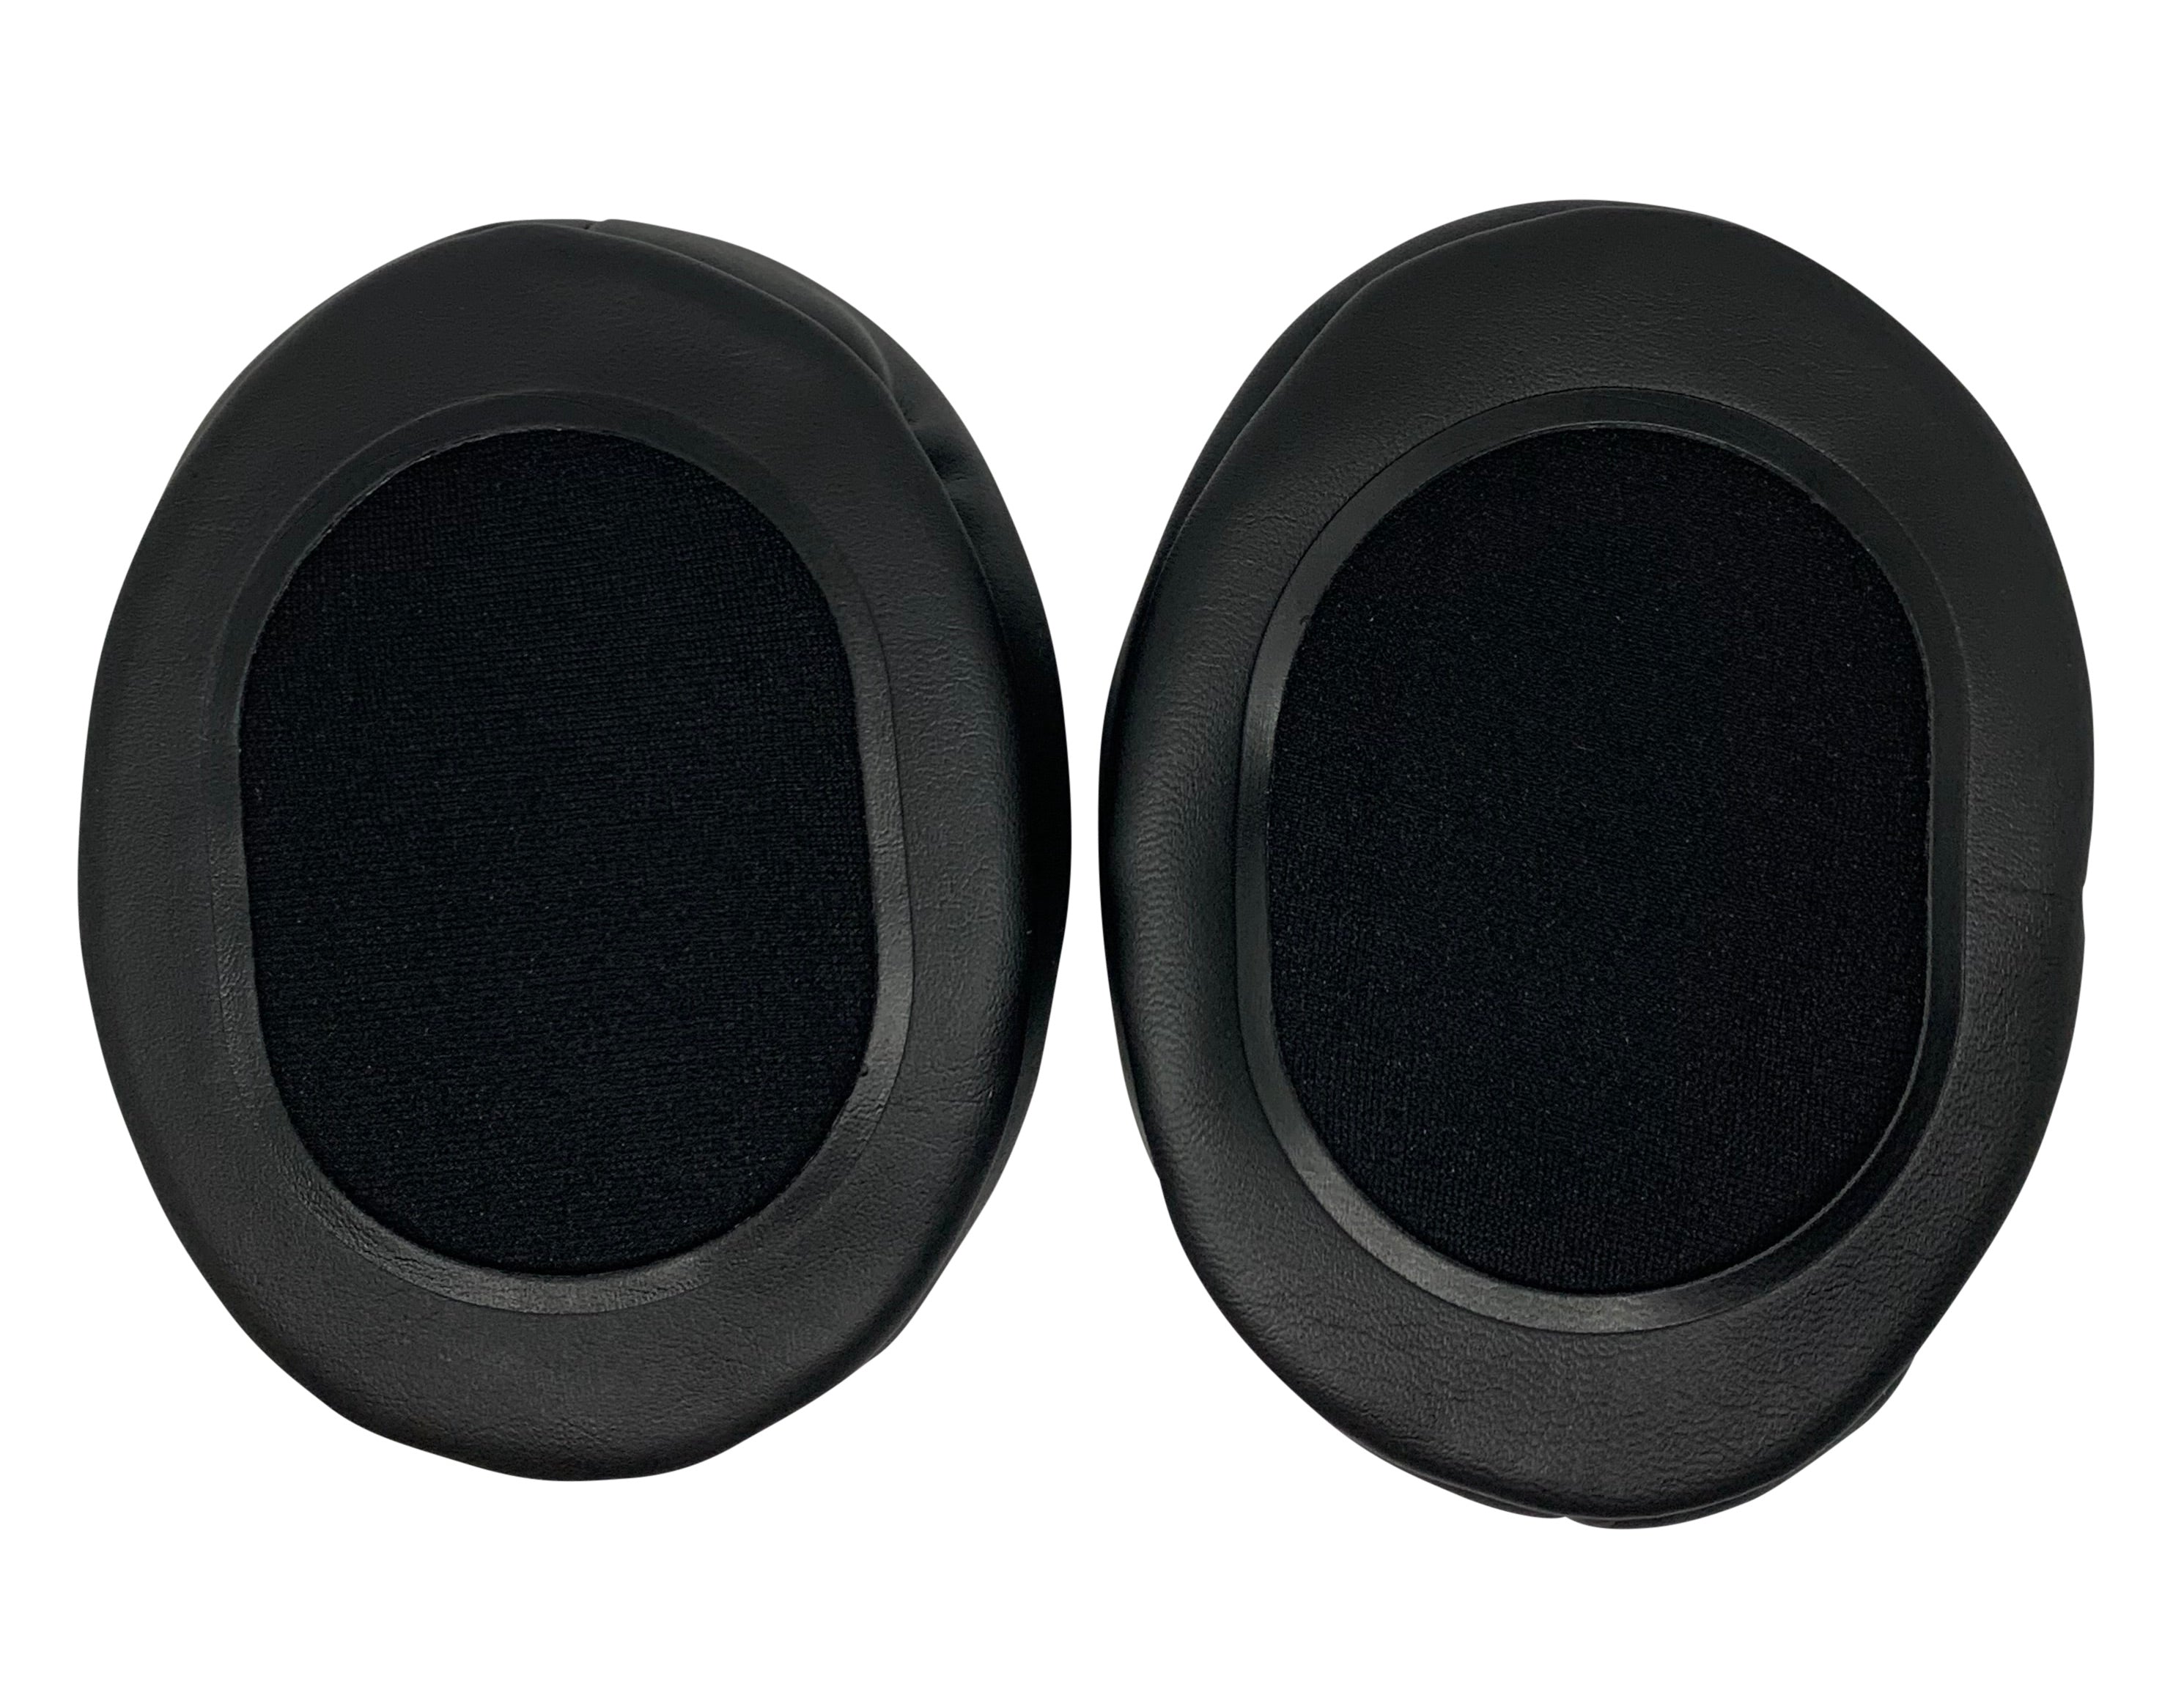 CentralSound Premium XL Memory Foam Universal Oval Ear Pad Cushion Replacements - CentralSound